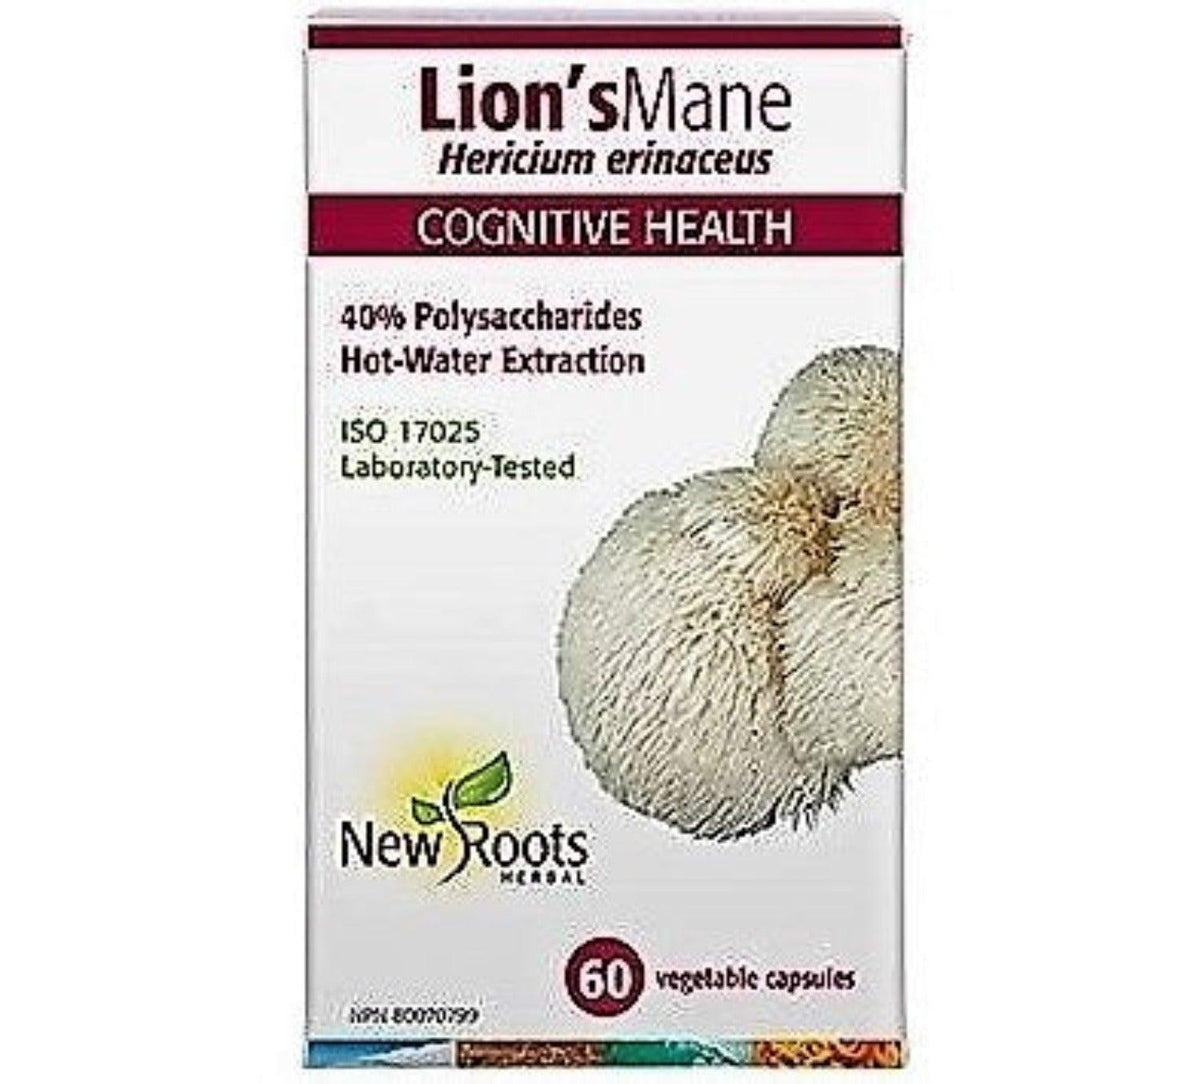 New Roots Lion's Mane 500mg 60 Caps Supplements - Cognitive Health at Village Vitamin Store